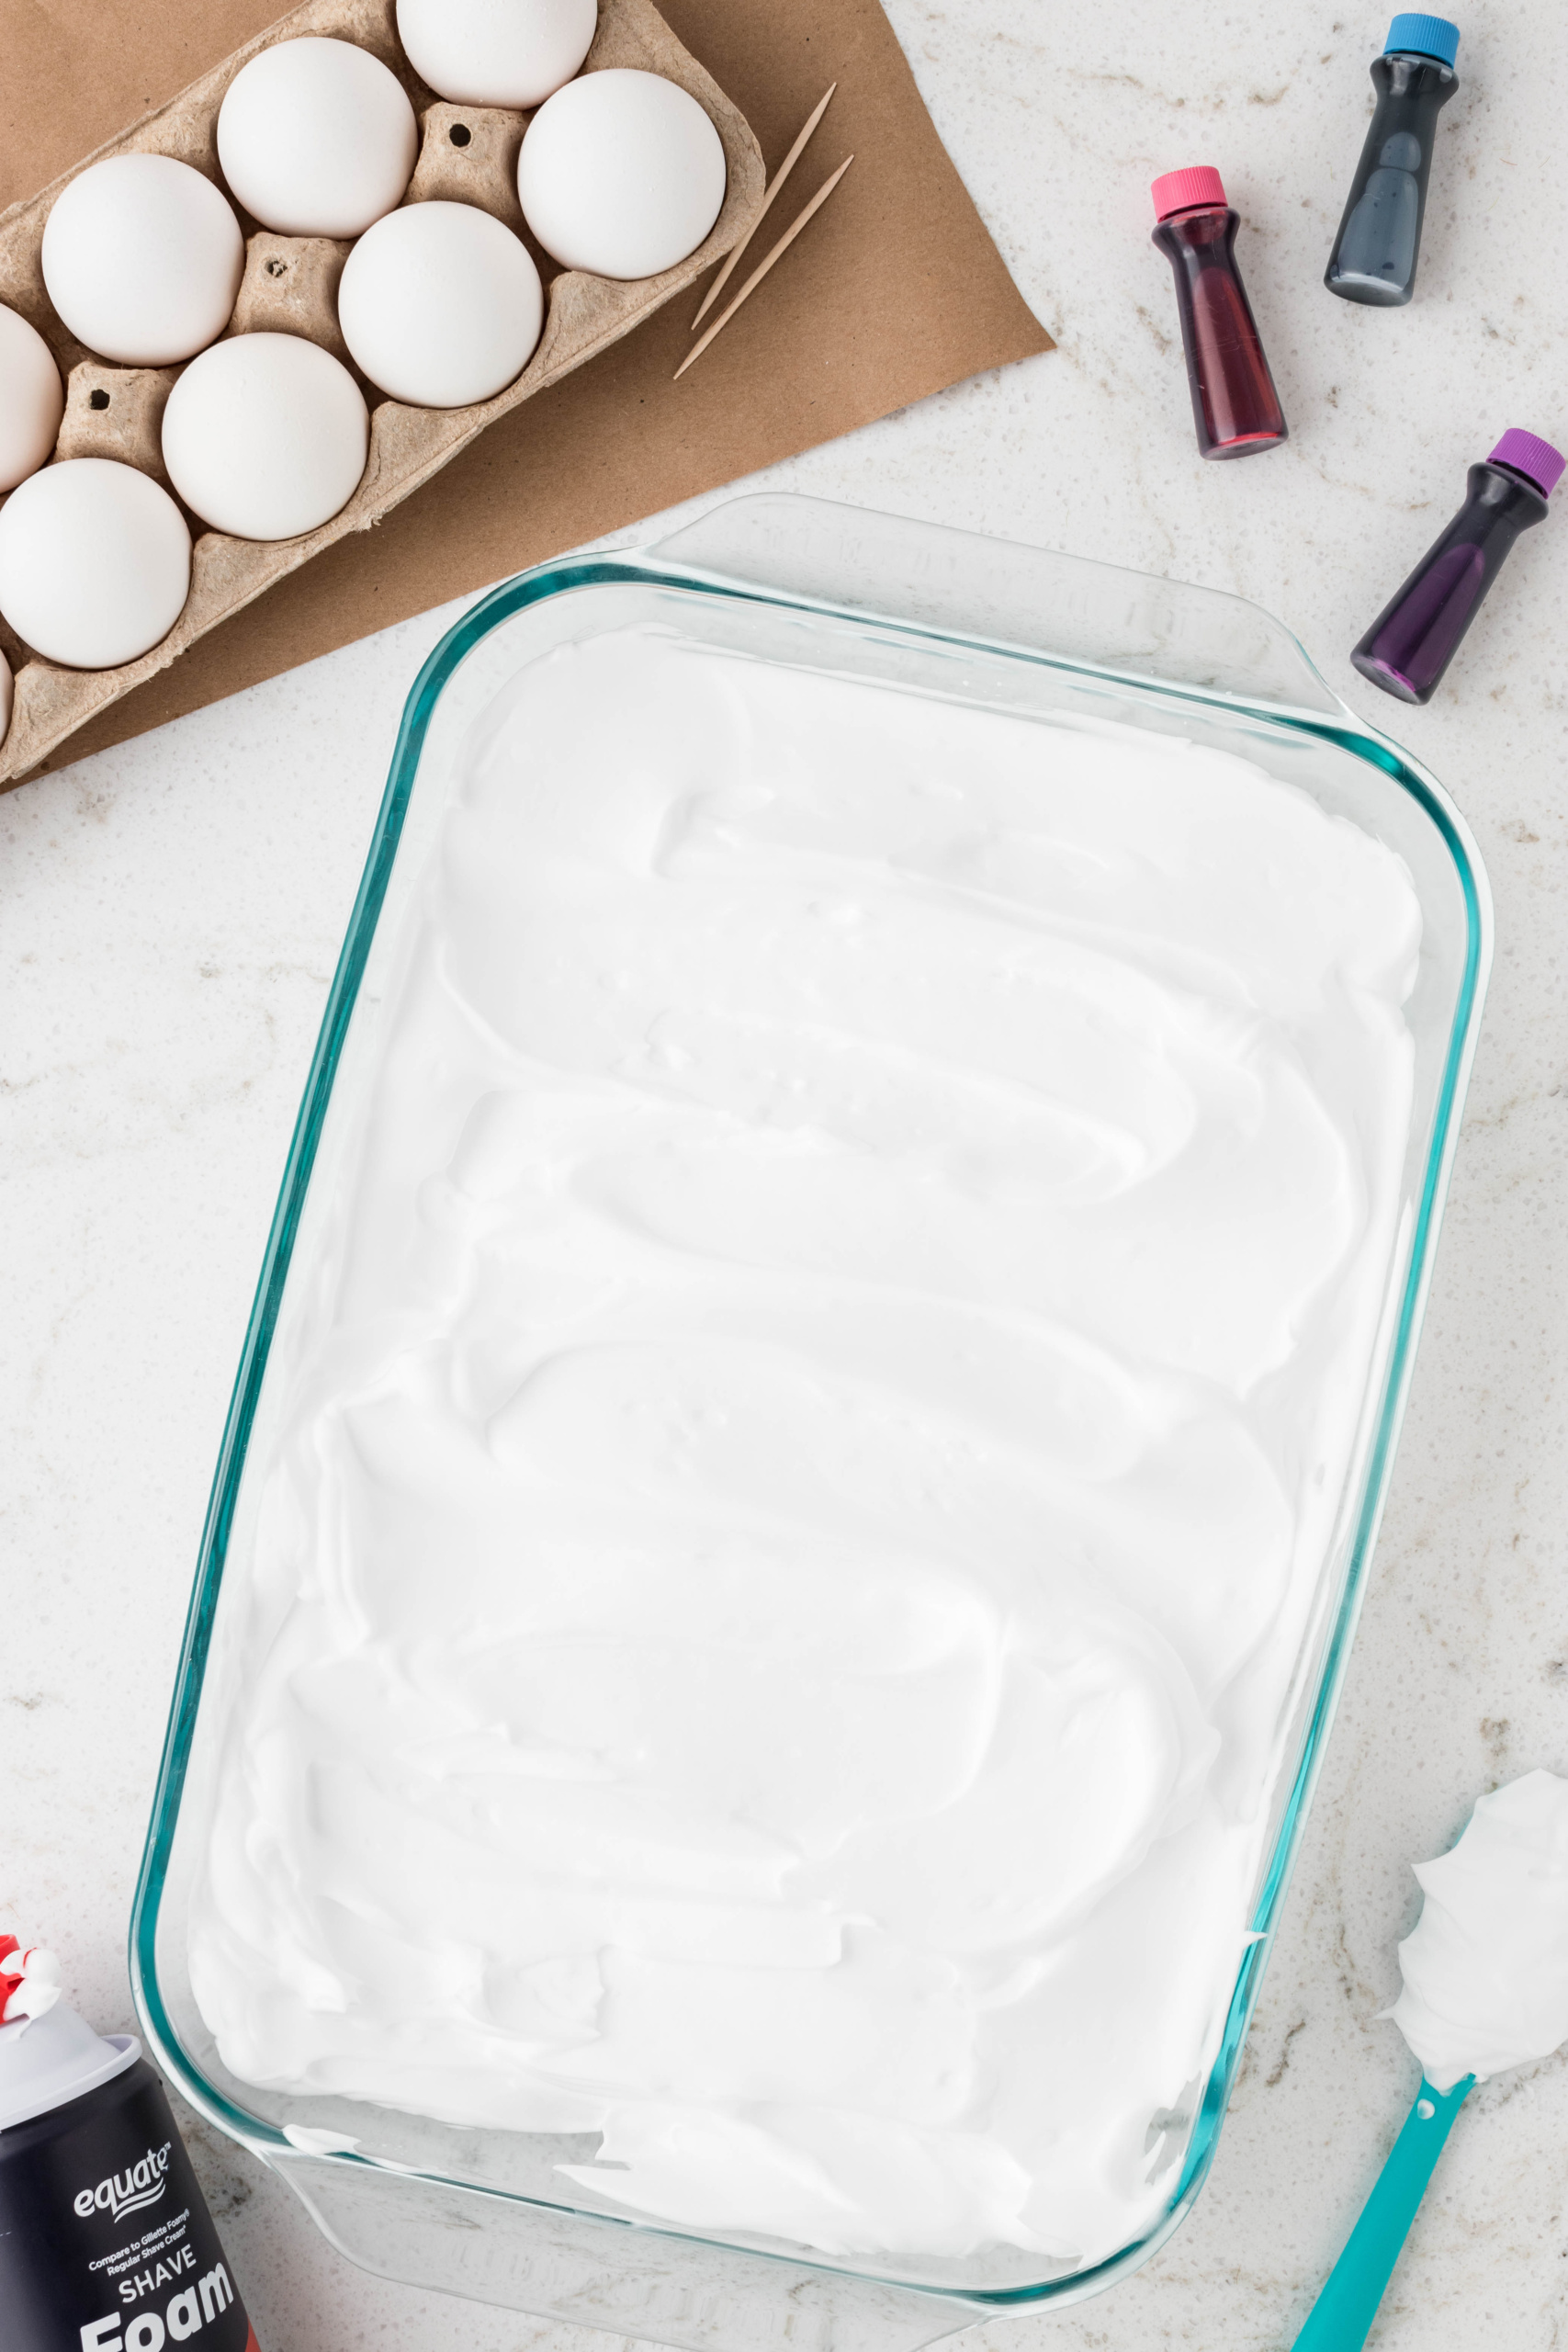 Fill the 9x13 Pan with Shaving Cream and Smooth out with a Spatula